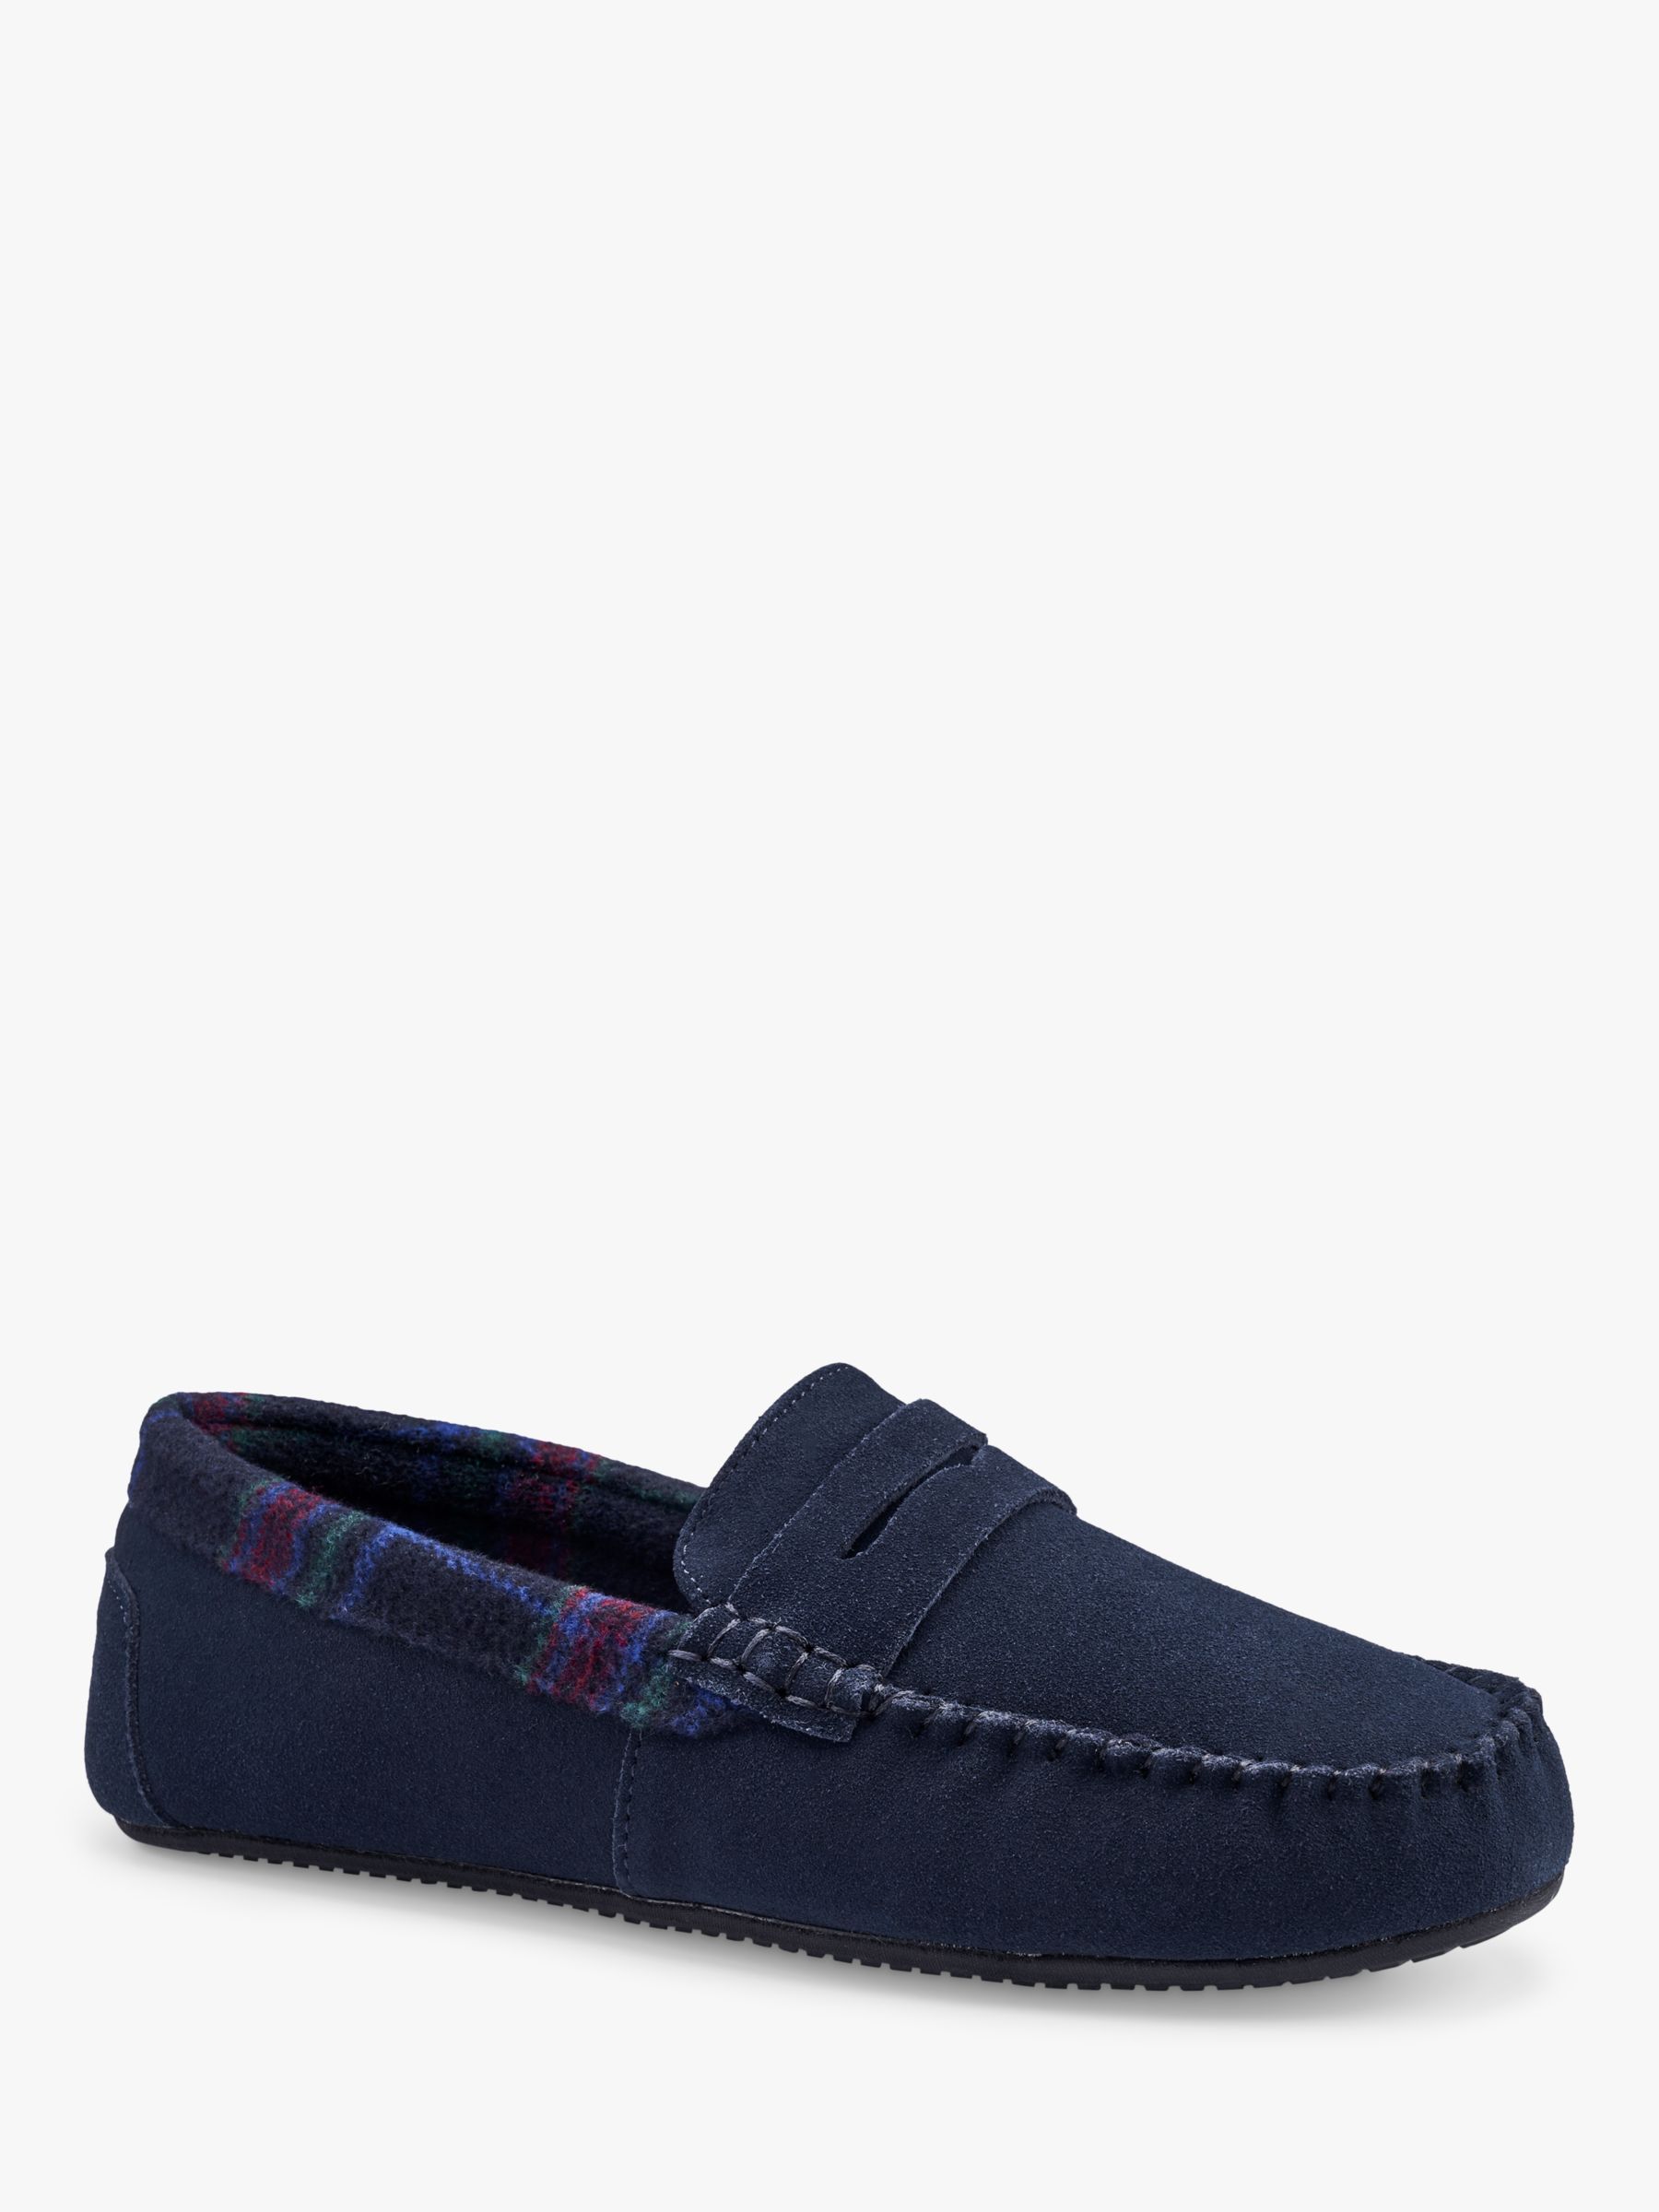 Buy Hotter Repose Moccasin Slippers Online at johnlewis.com